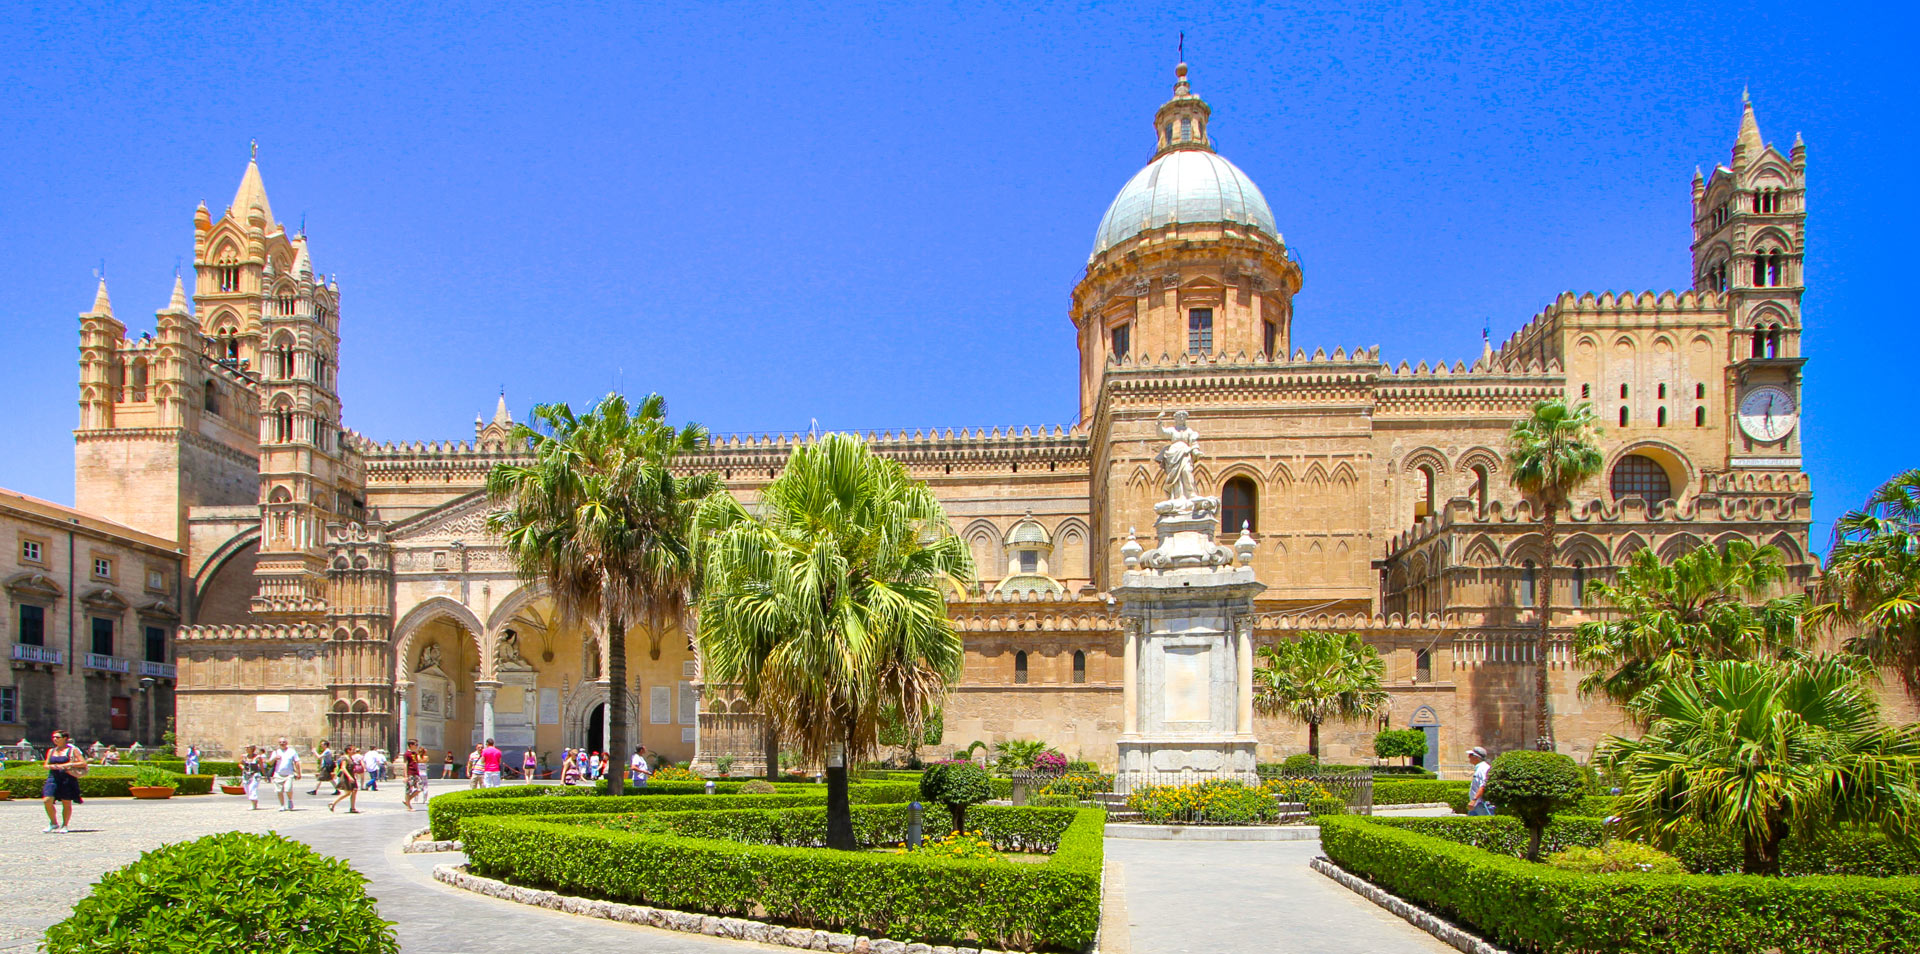 The Best Things to Do in Sicily | Must-See Attractions | Visit Sicily